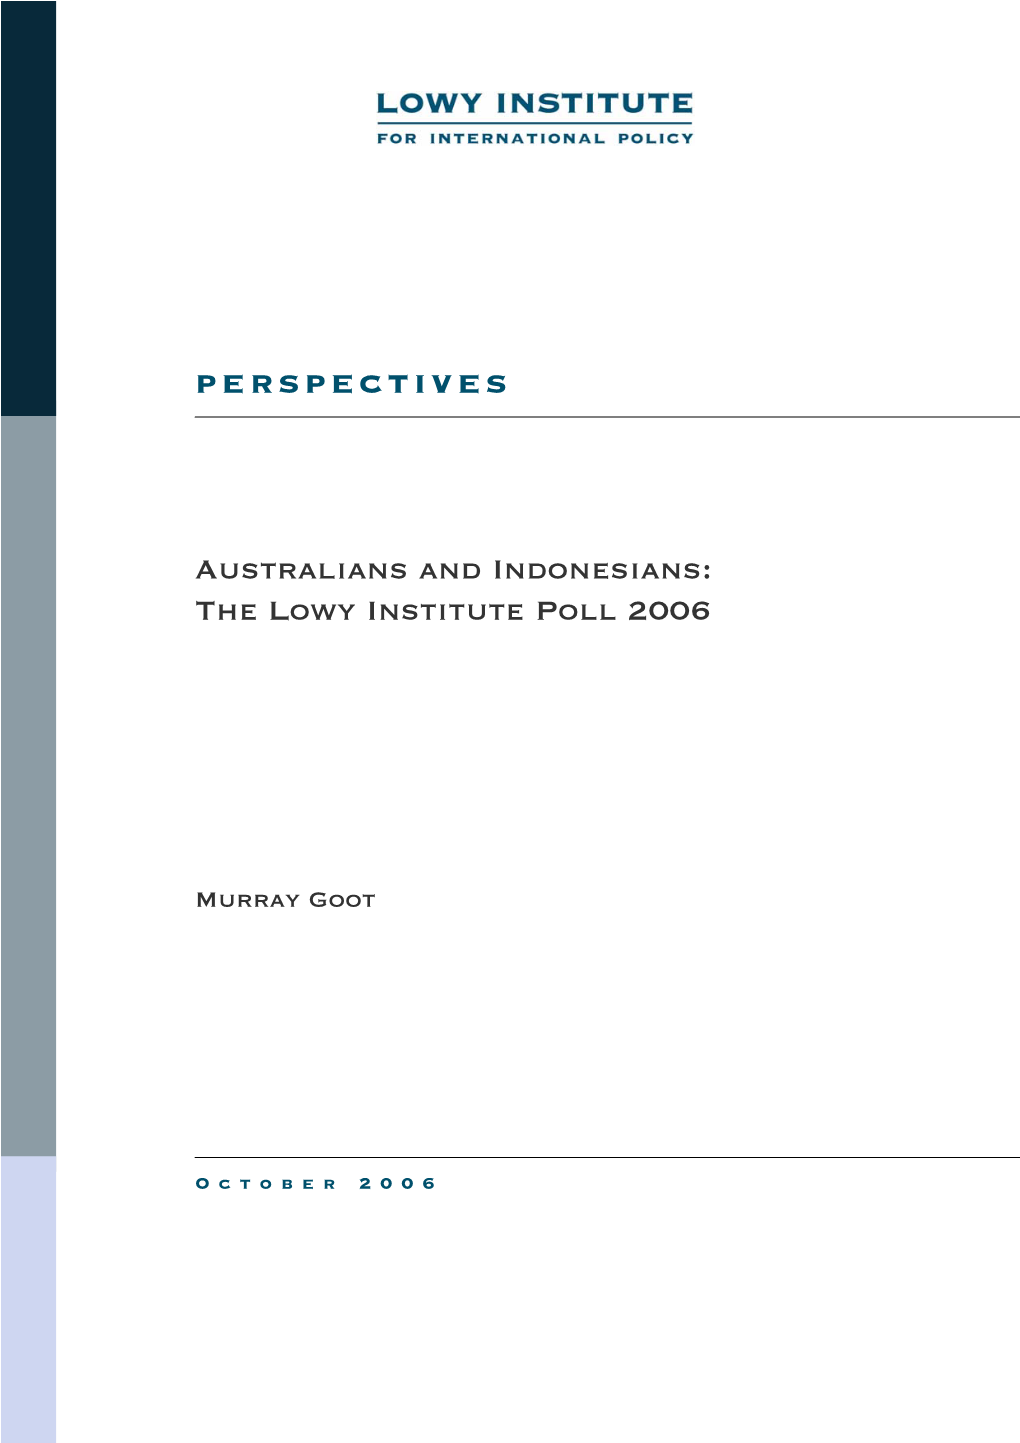 Australians and Indonesians: the Lowy Institute Poll 2006